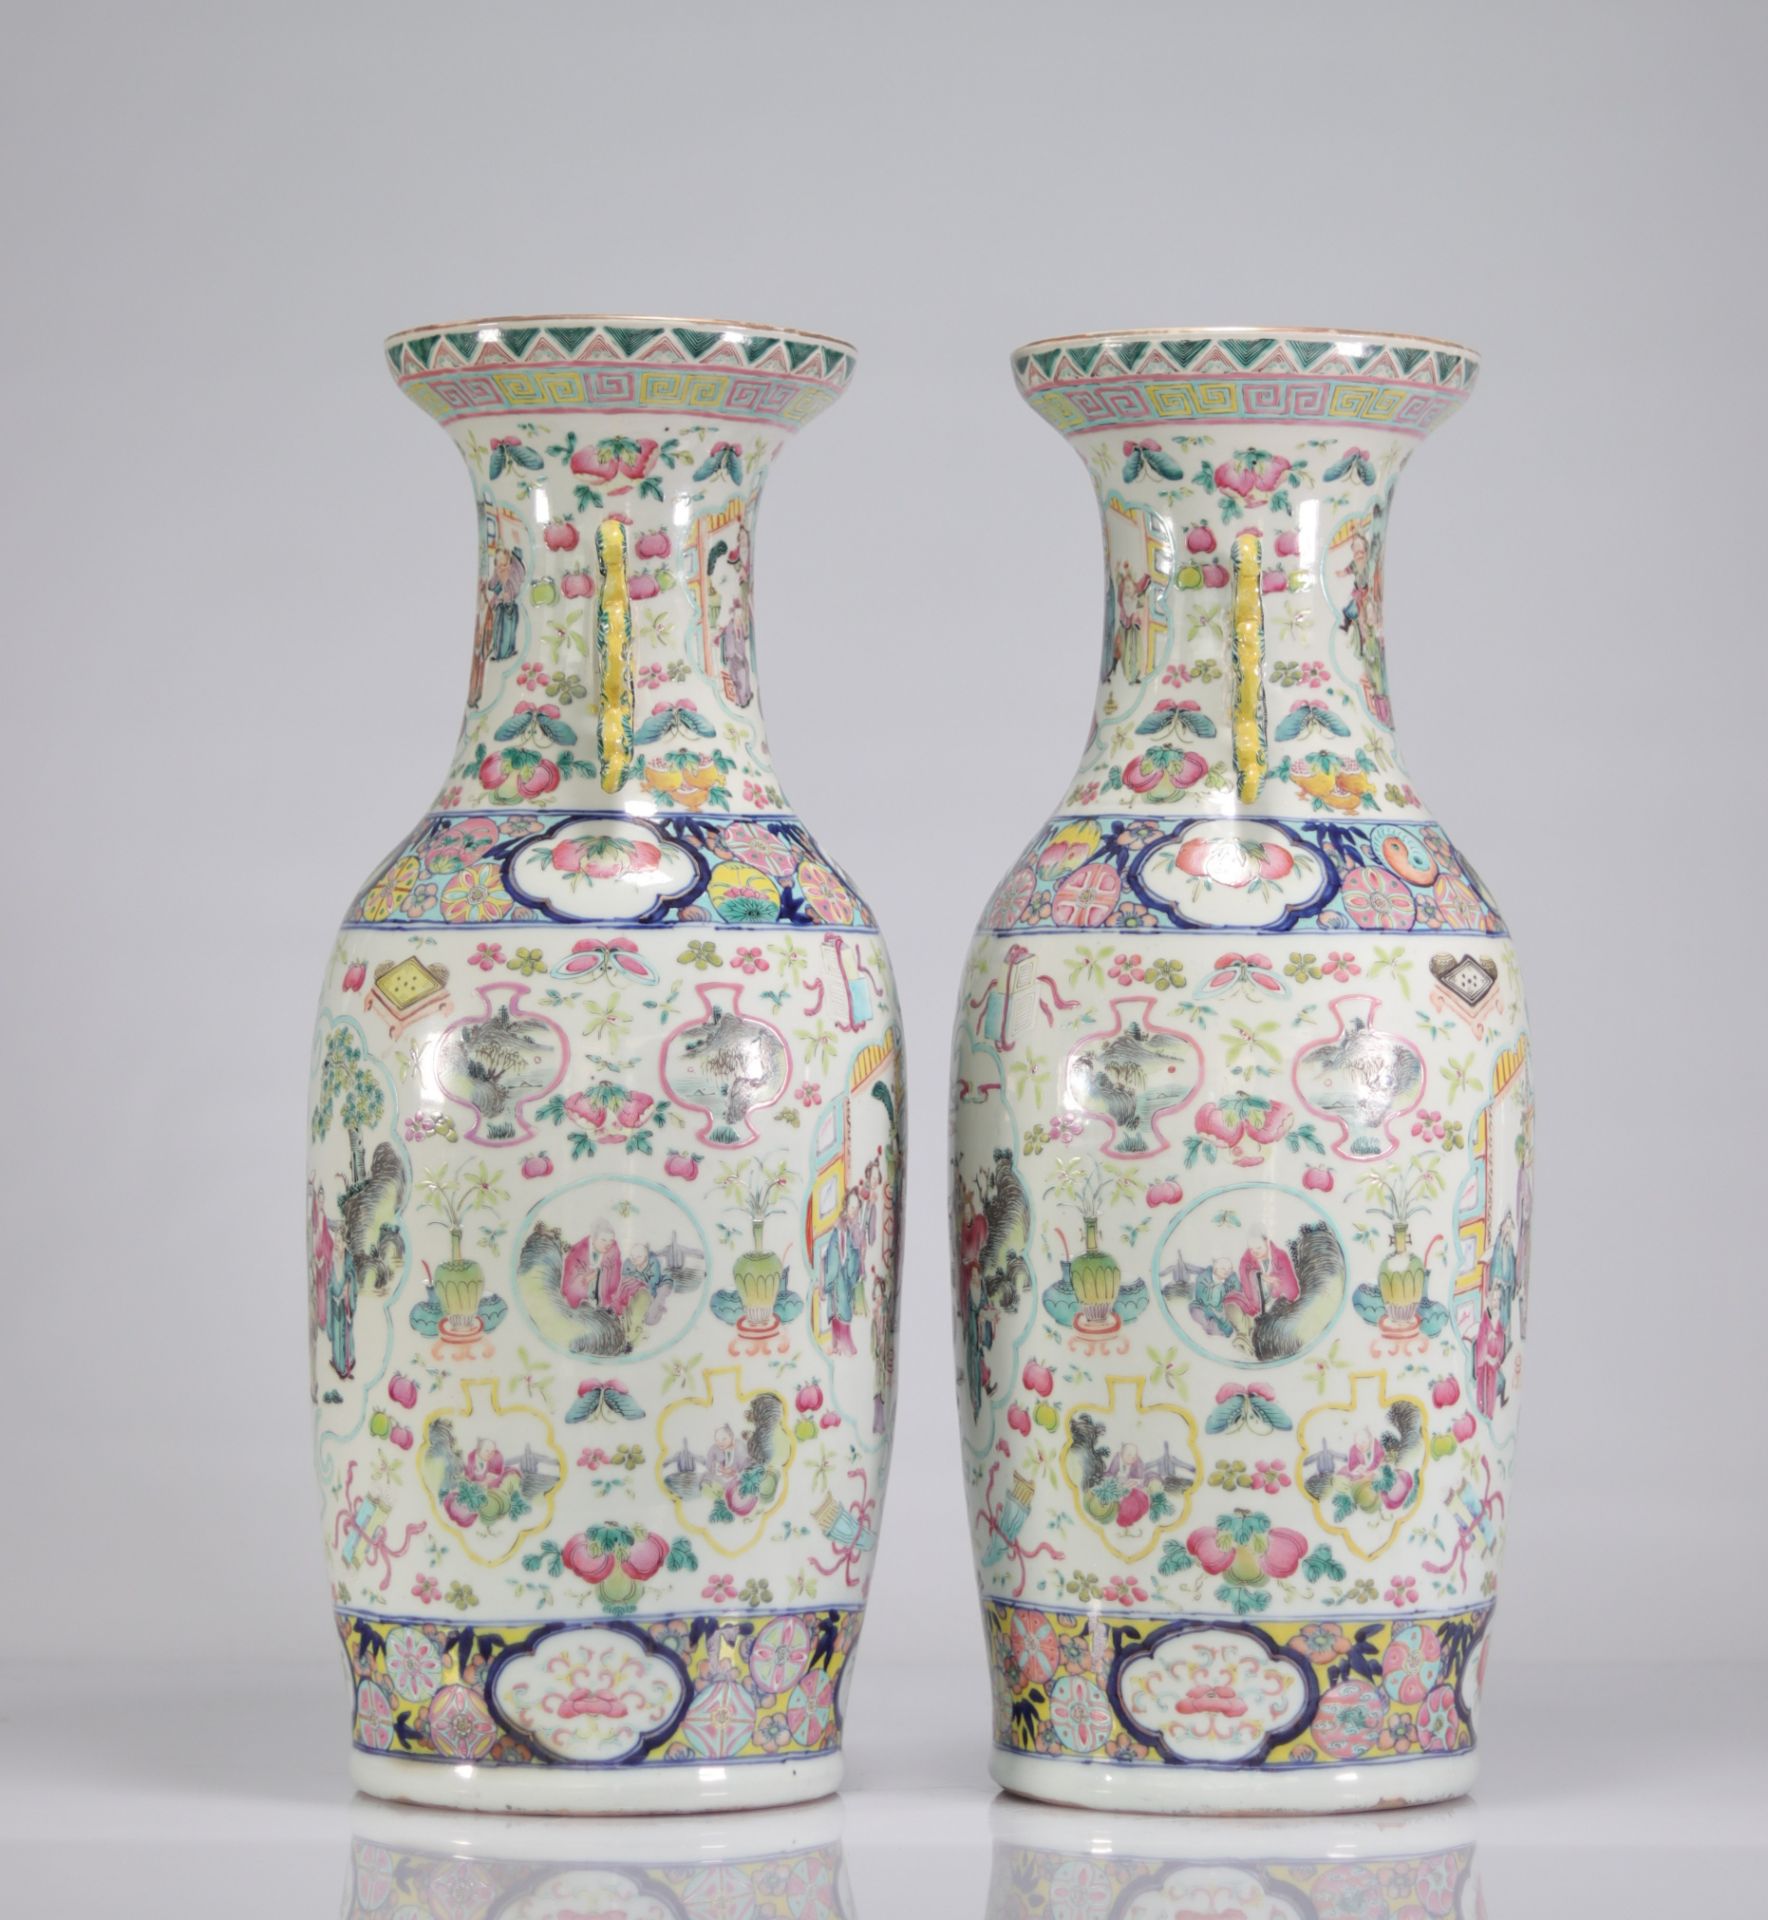 Pair of 19th century Rose family vases - Image 4 of 6